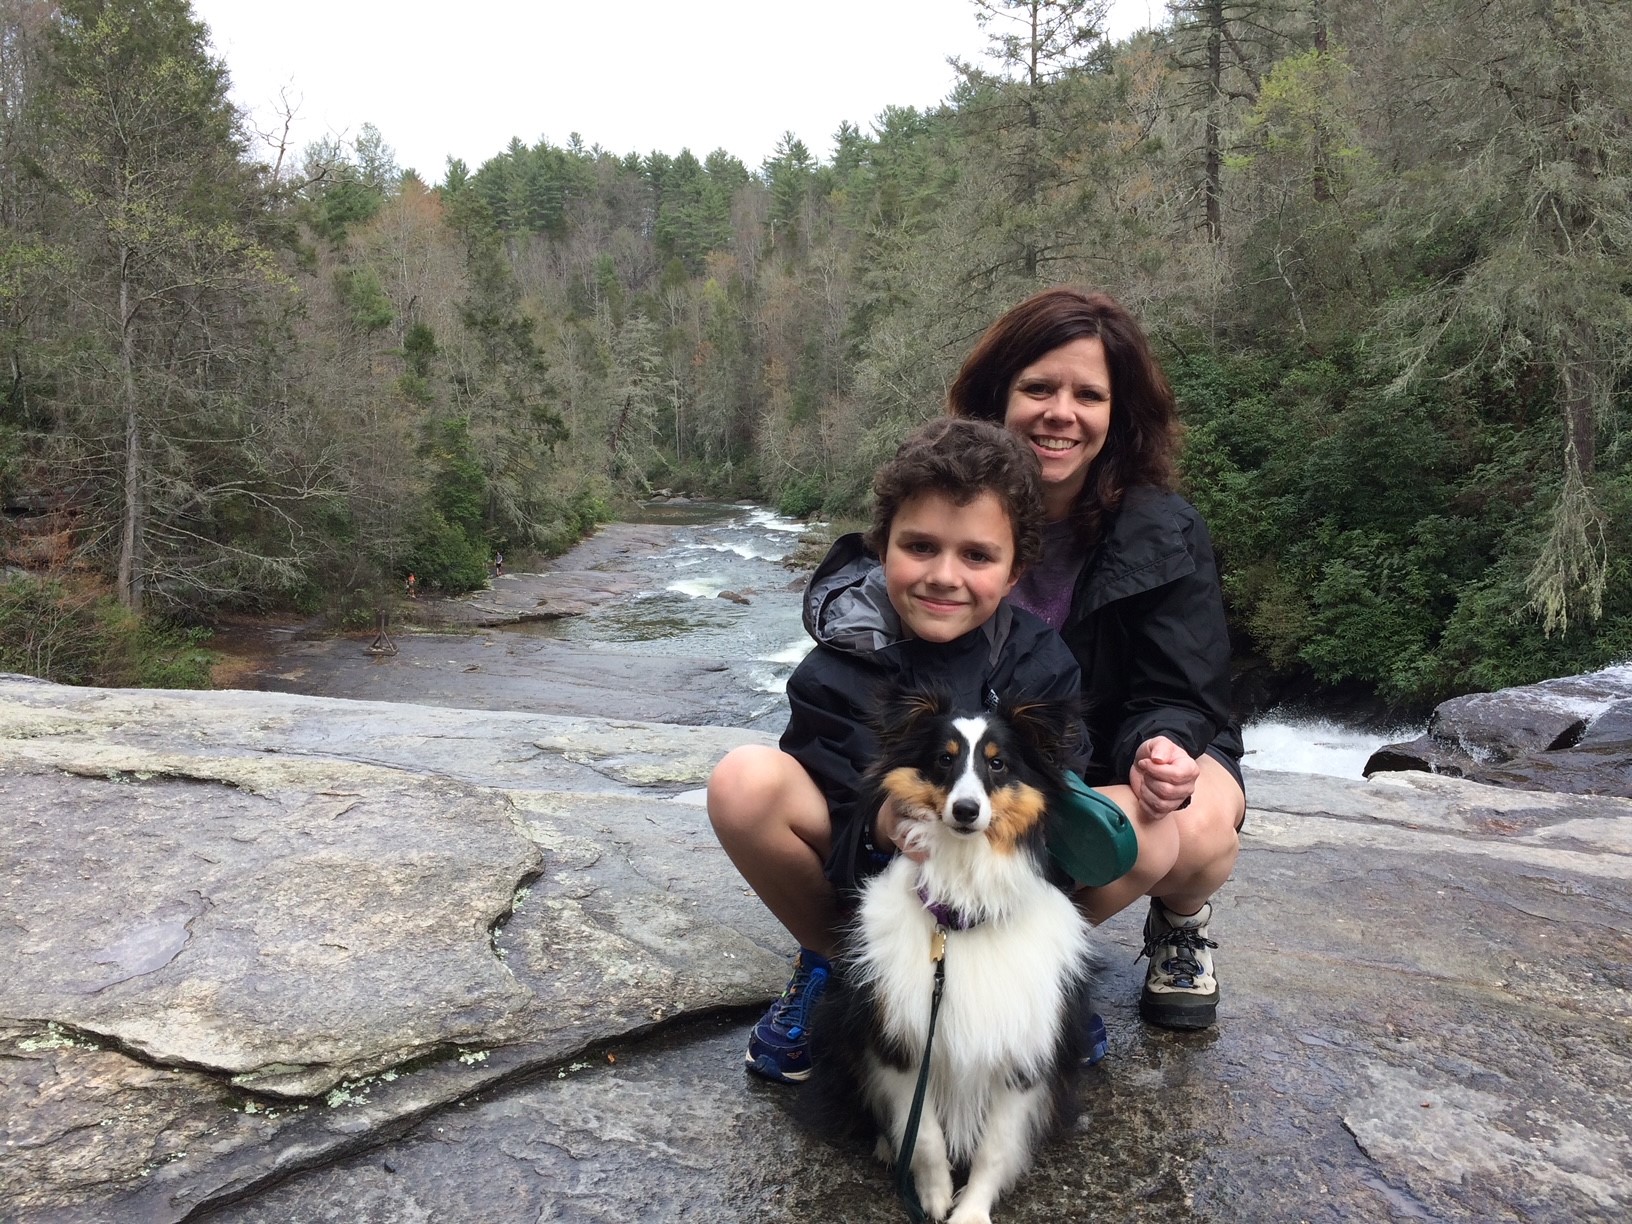 Susan Campbell and her son in a WNC river